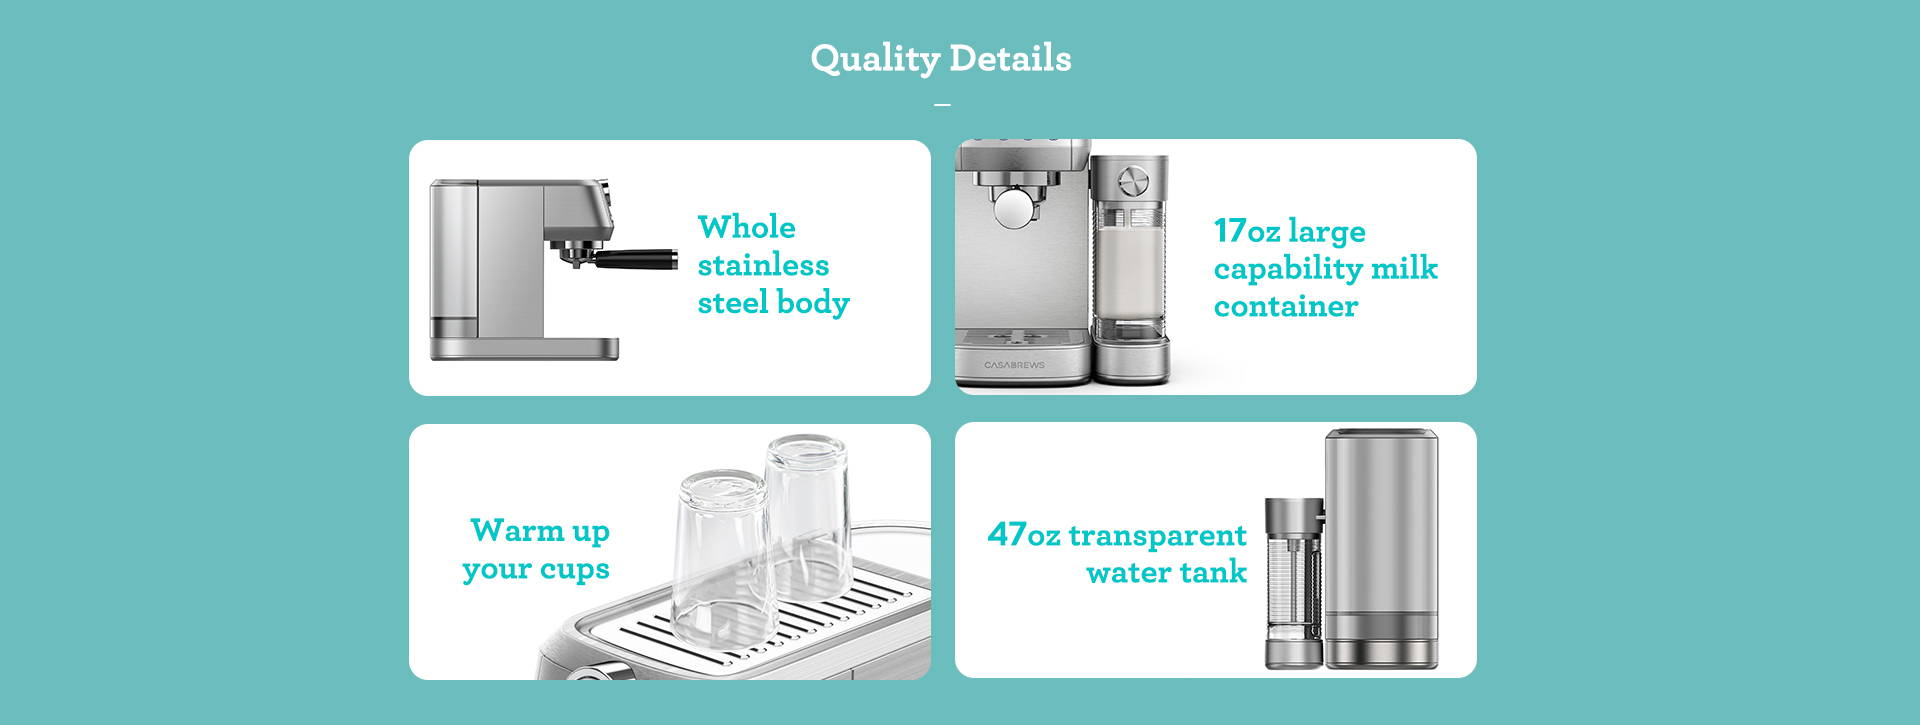 Quality Details Whole stainless steel body 17oz capability milk container warm up your cups 47oz transparent water tank